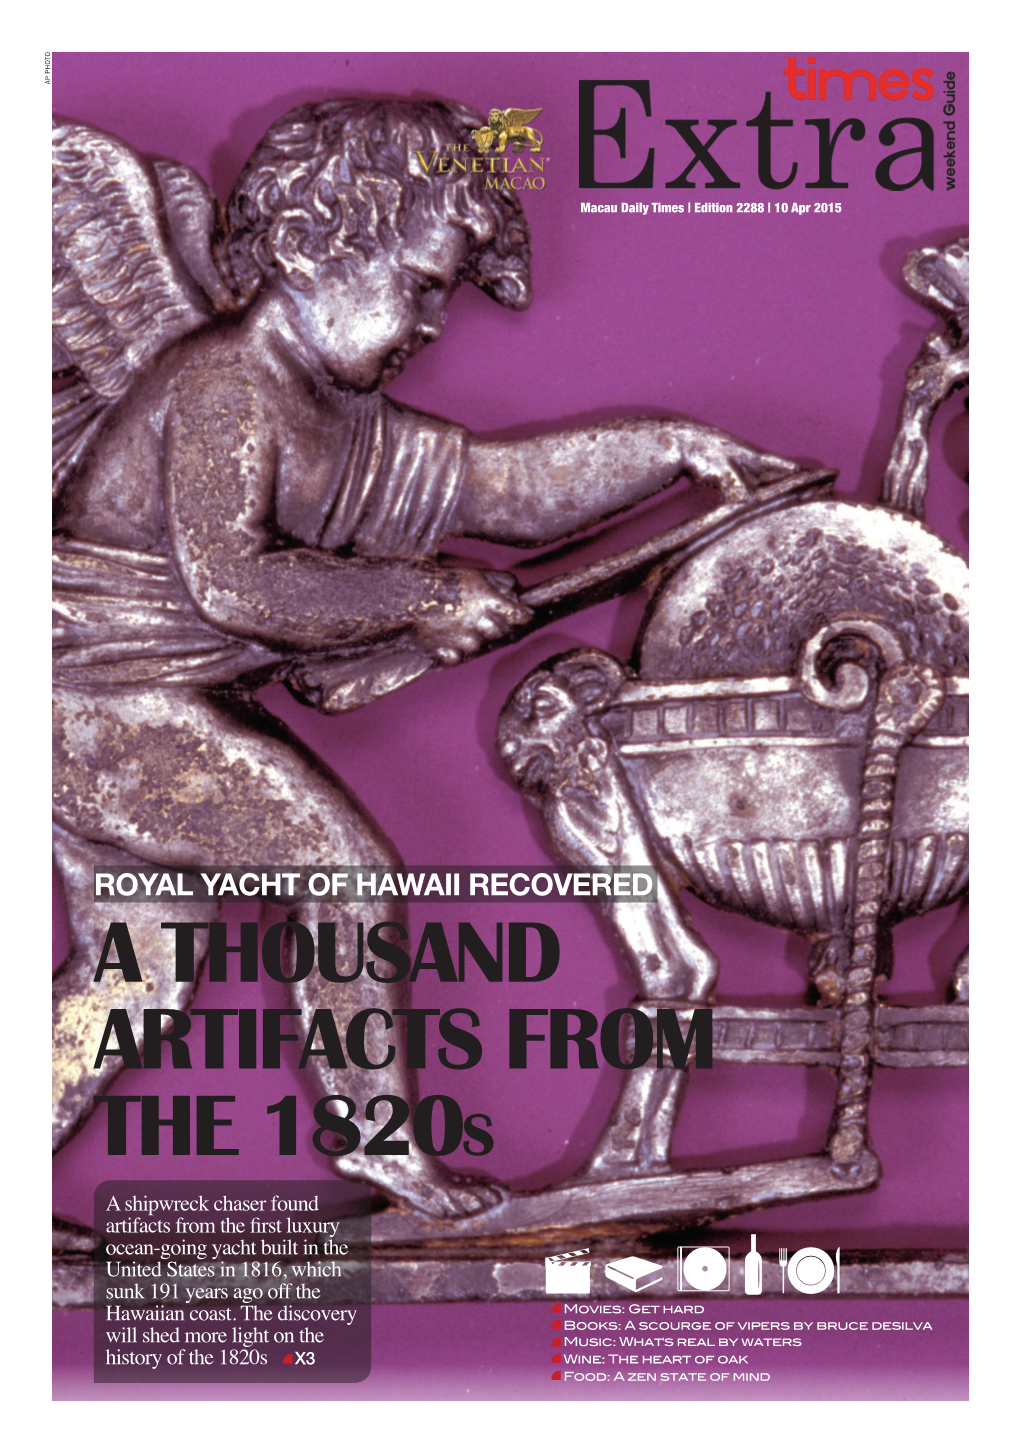 Extra 2288 – a Thousand Artifacts from the 1820S